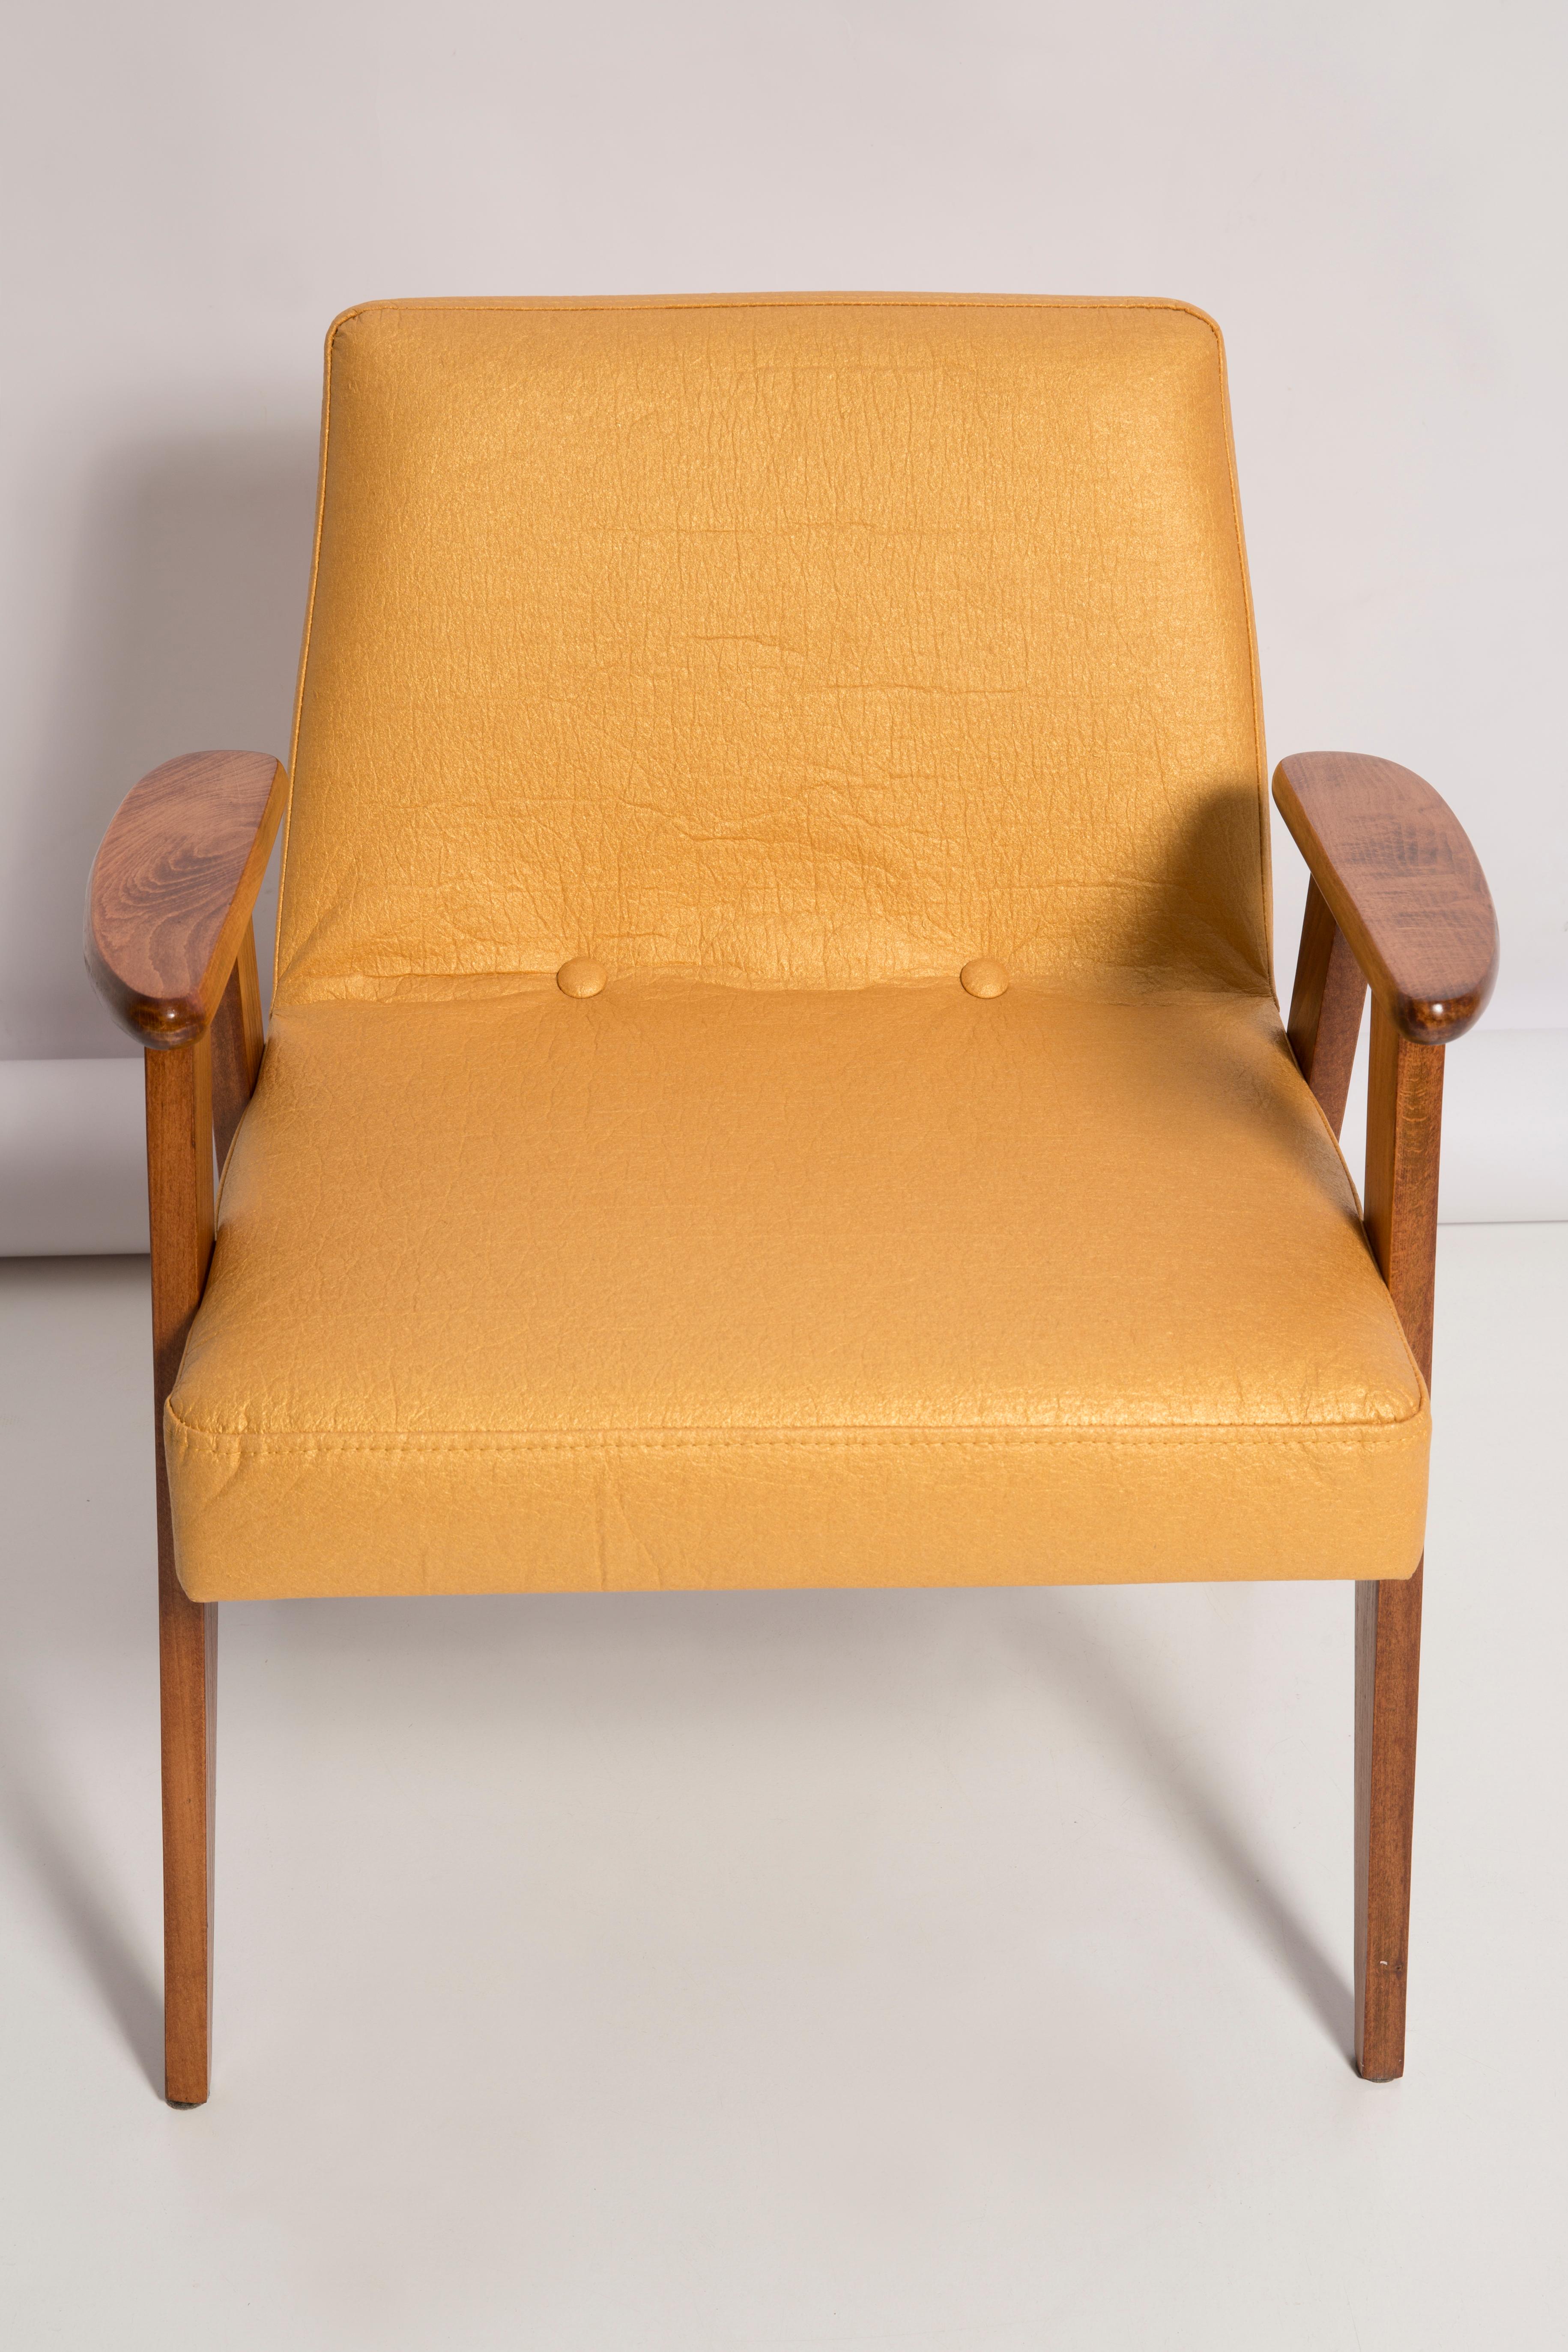 Two Midcentury 366 Club Armchairs in Pineapple Leather, Jozef Chierowski, 1960s For Sale 3